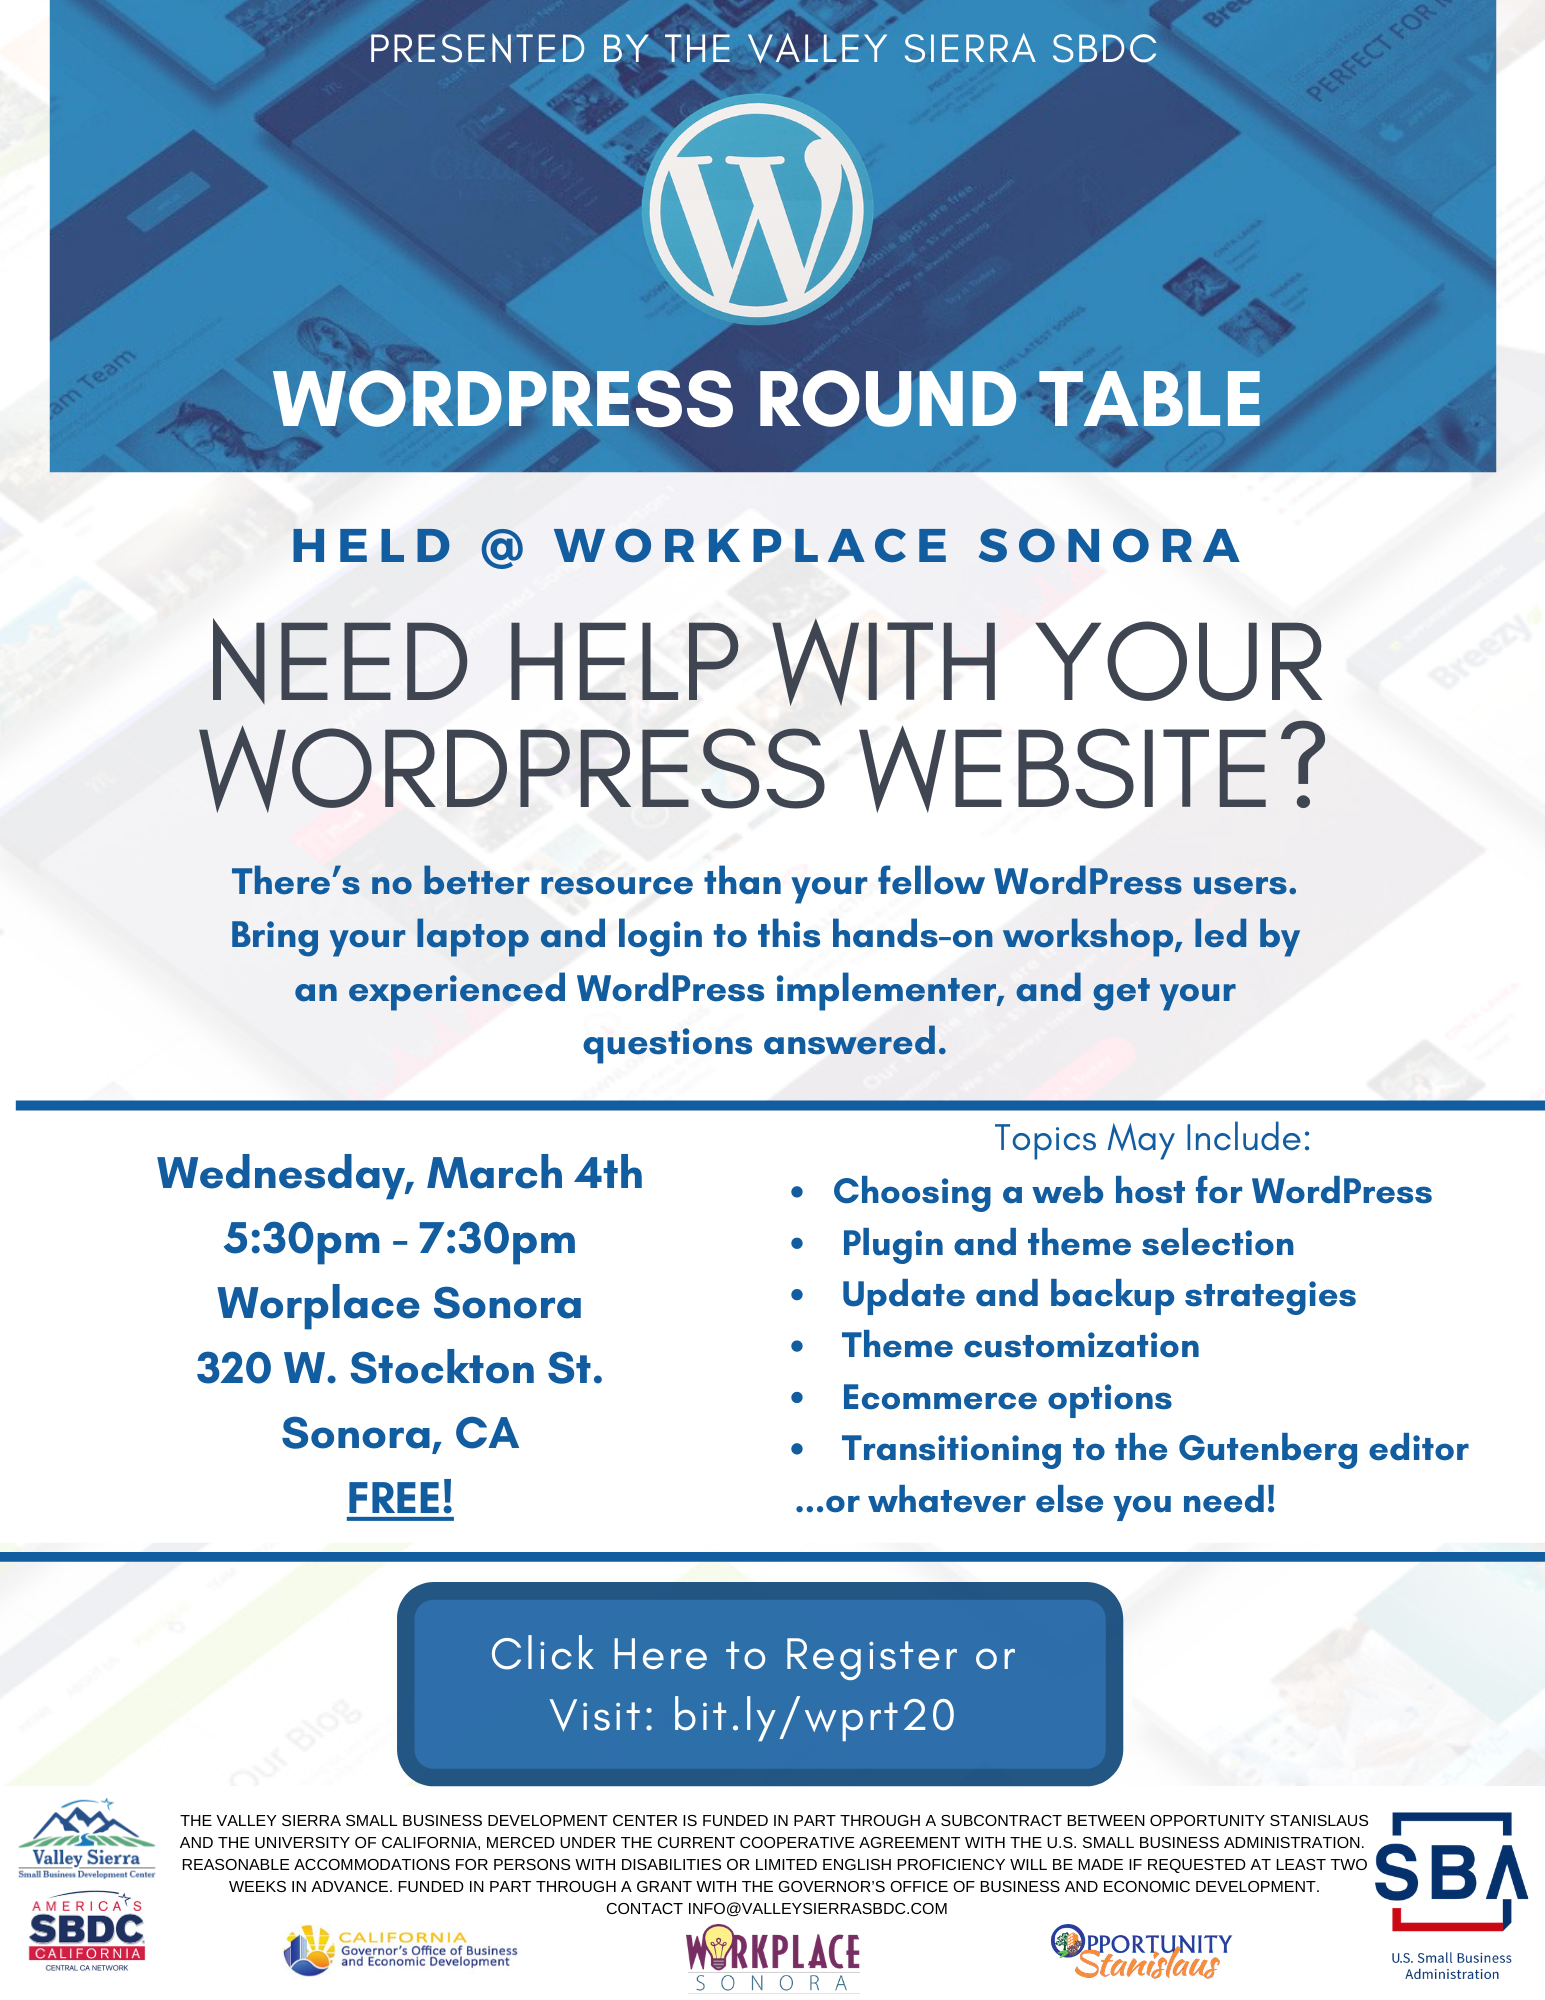 Event Flyer, Sonora: WordPress Round Table Workshop, 3_4_20, 5:30pm - 7:30pm. Free Registration Now Open! at Workplace Sonora, 320 W. Stockton Street, Sonora, Ca.